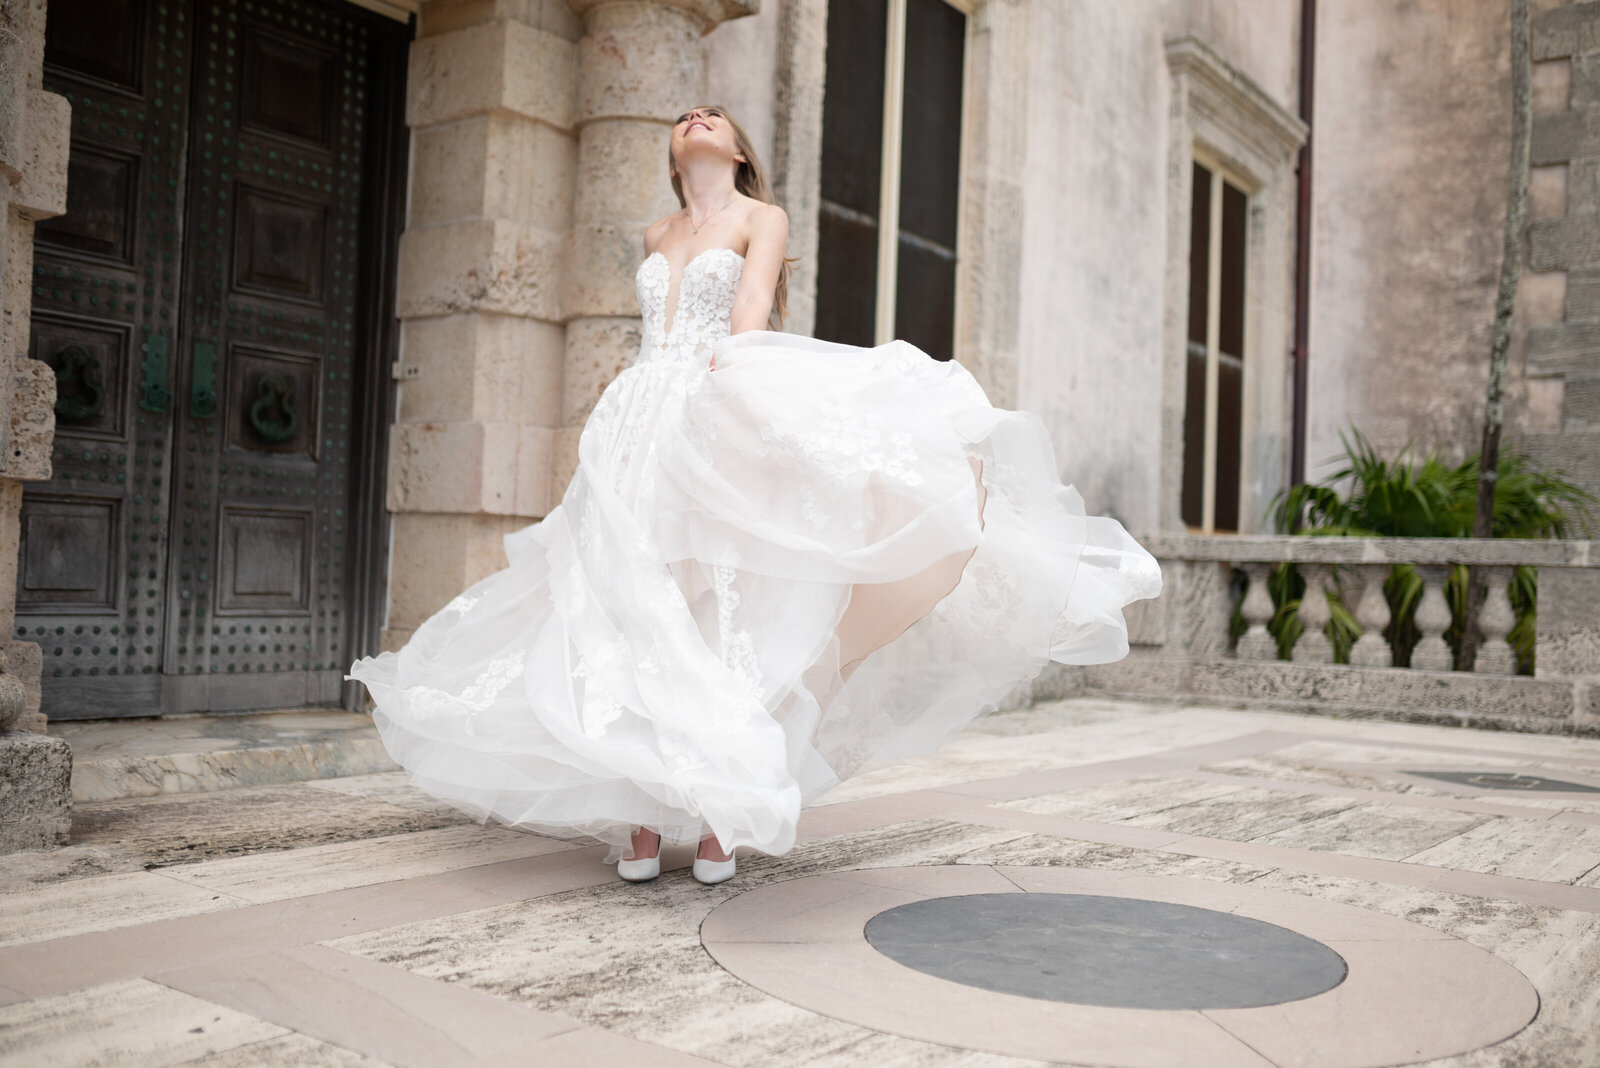 Bride twirling in her dress, her head thrown back with laughter